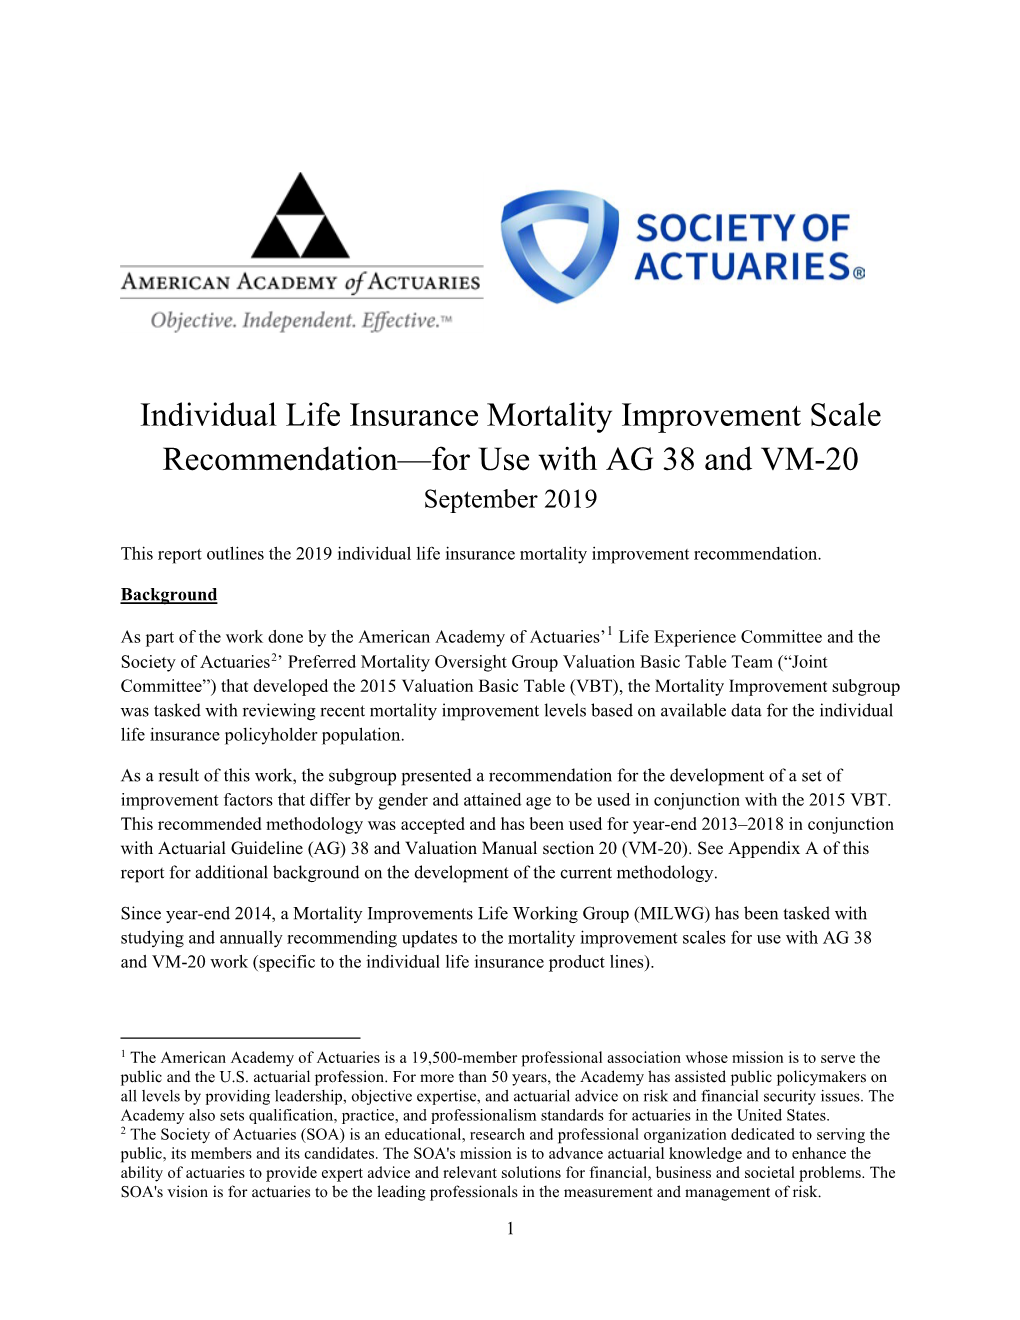 Individual Life Insurance Mortality Improvement Scale Recommendation—For Use with AG 38 and VM-20 September 2019